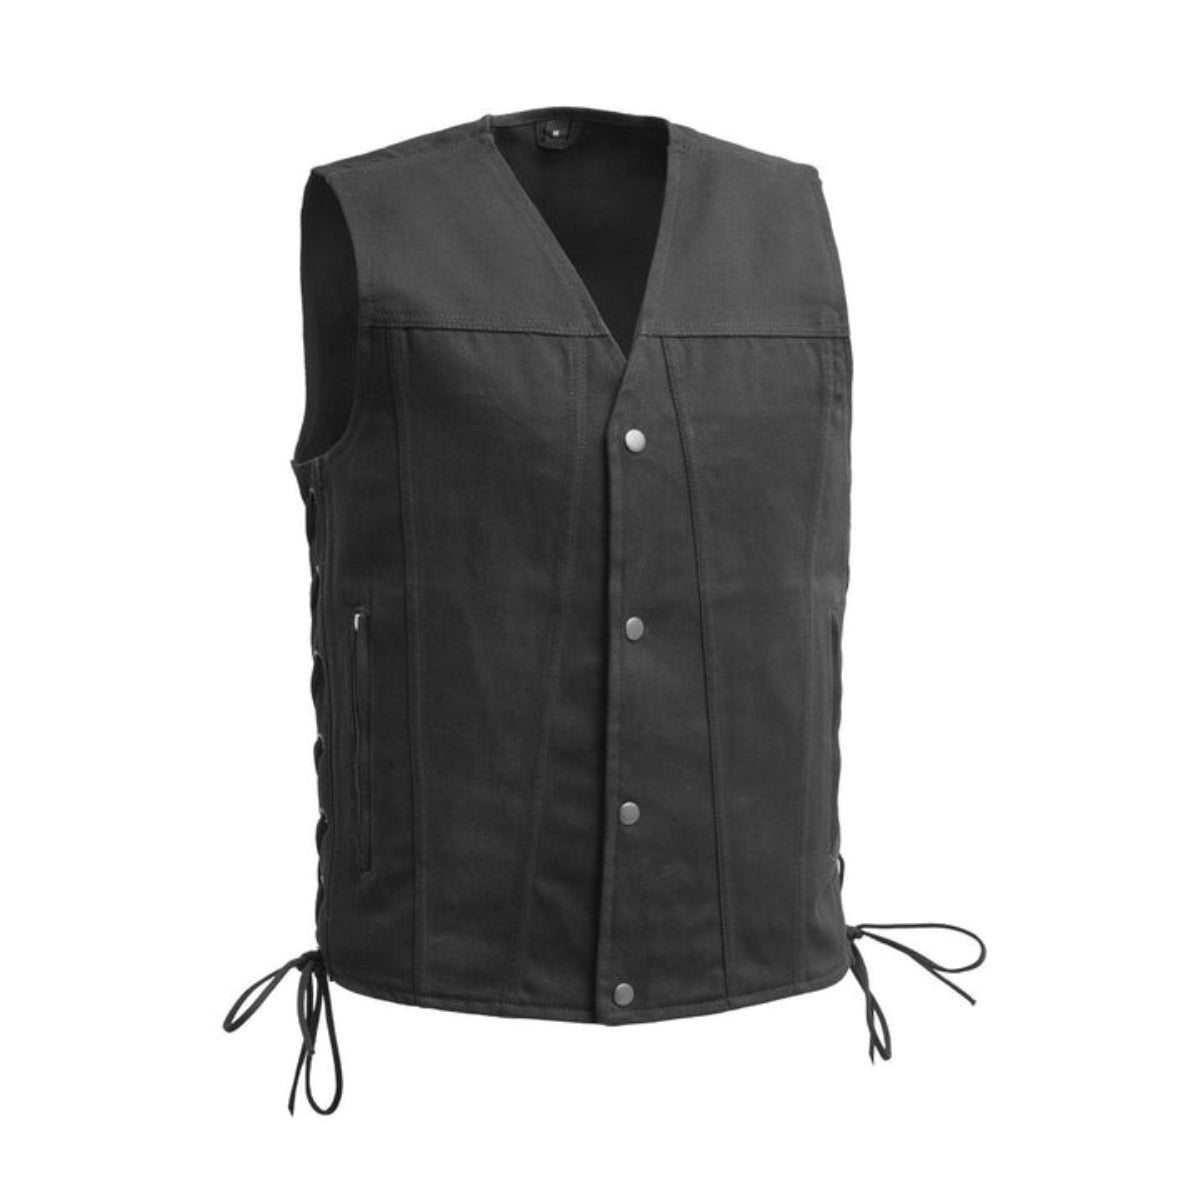 First Manufacturing Lone Star - Men's Motorcycle Twill Vest, Black